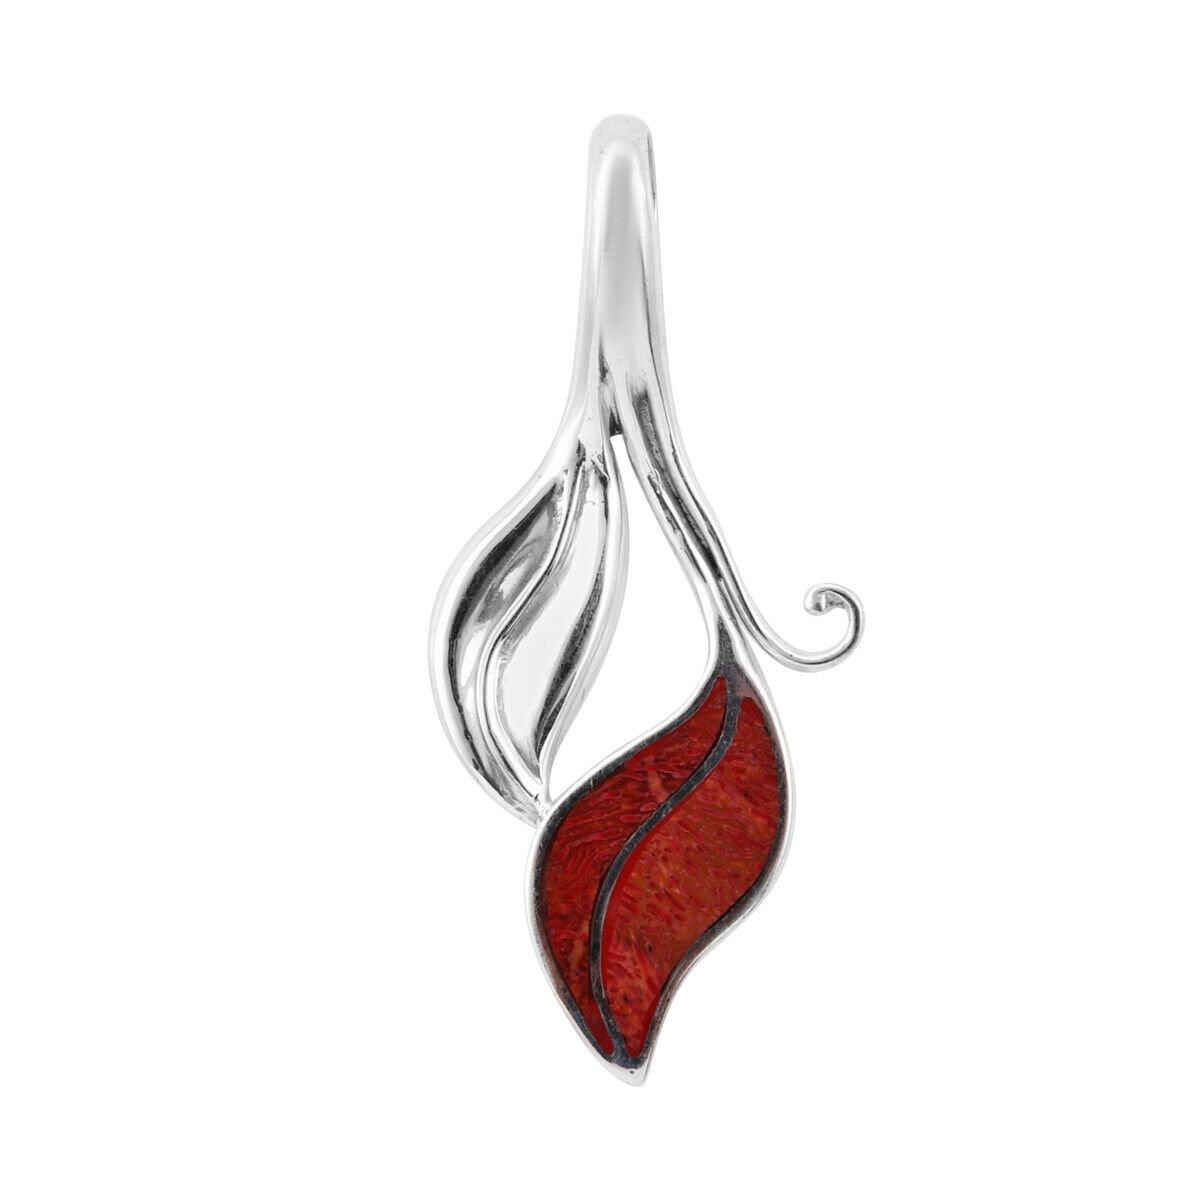 Handmade RED CORAL LEAF Pendant in Sterling Silver 925 - 4 Cm #P70 - Inspiring Jewellery